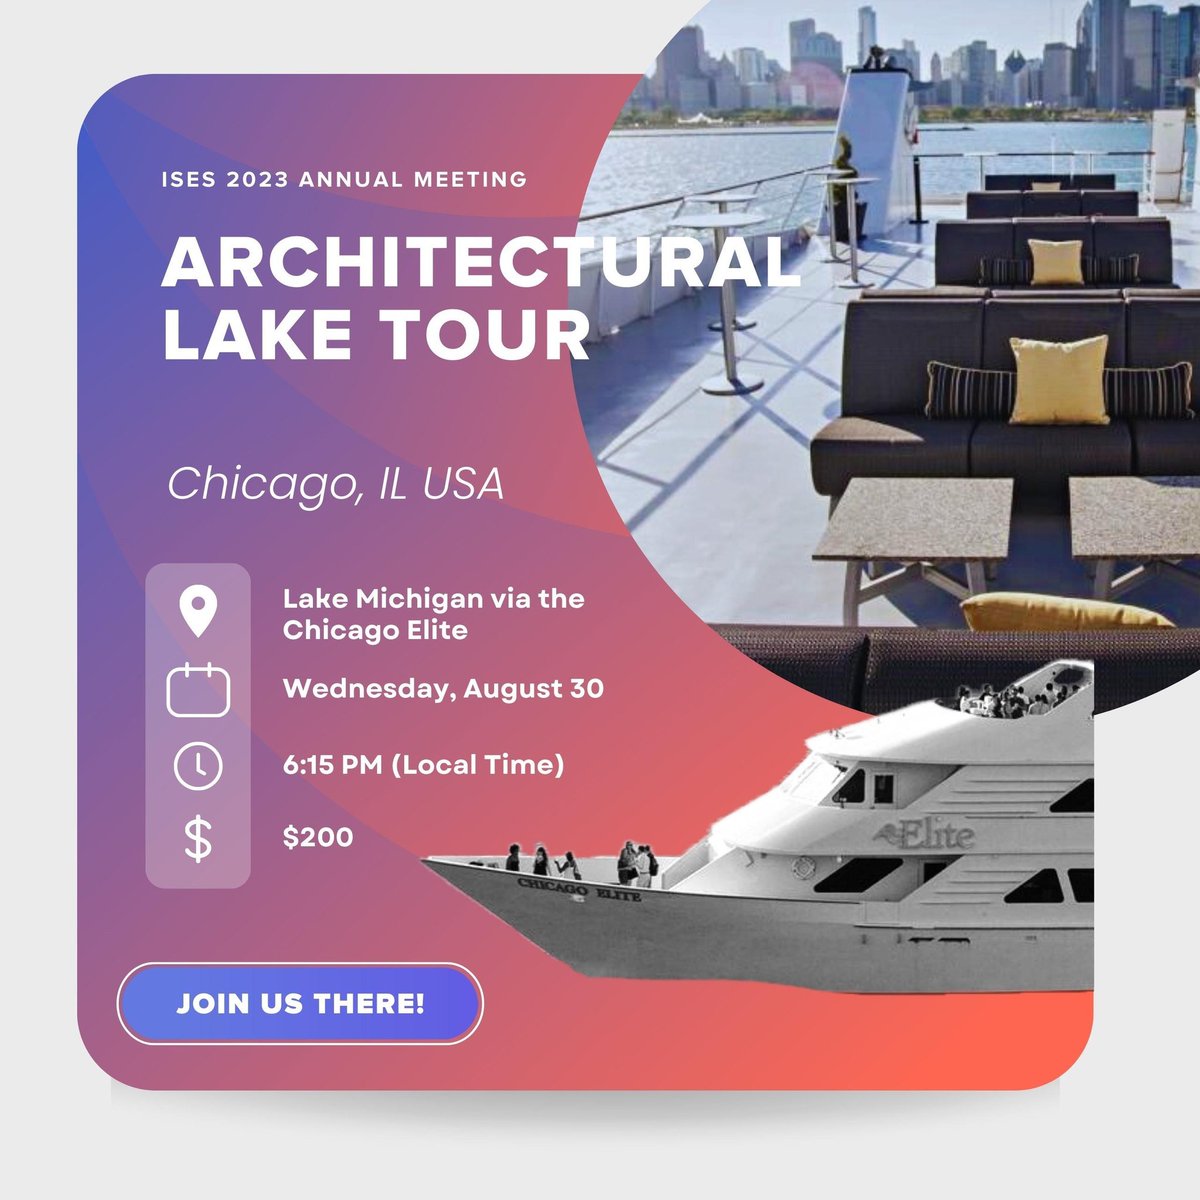 I’m  headed to #ISES2023 …lots of great presentations and updates on  #exposurescience research!  I’m also registered for the Architectural  Lake Tour on Wednesday evening!  Join me!  Contact ISES (contact@intlexposurescience.org ) to get registered today! Don't miss out!!!